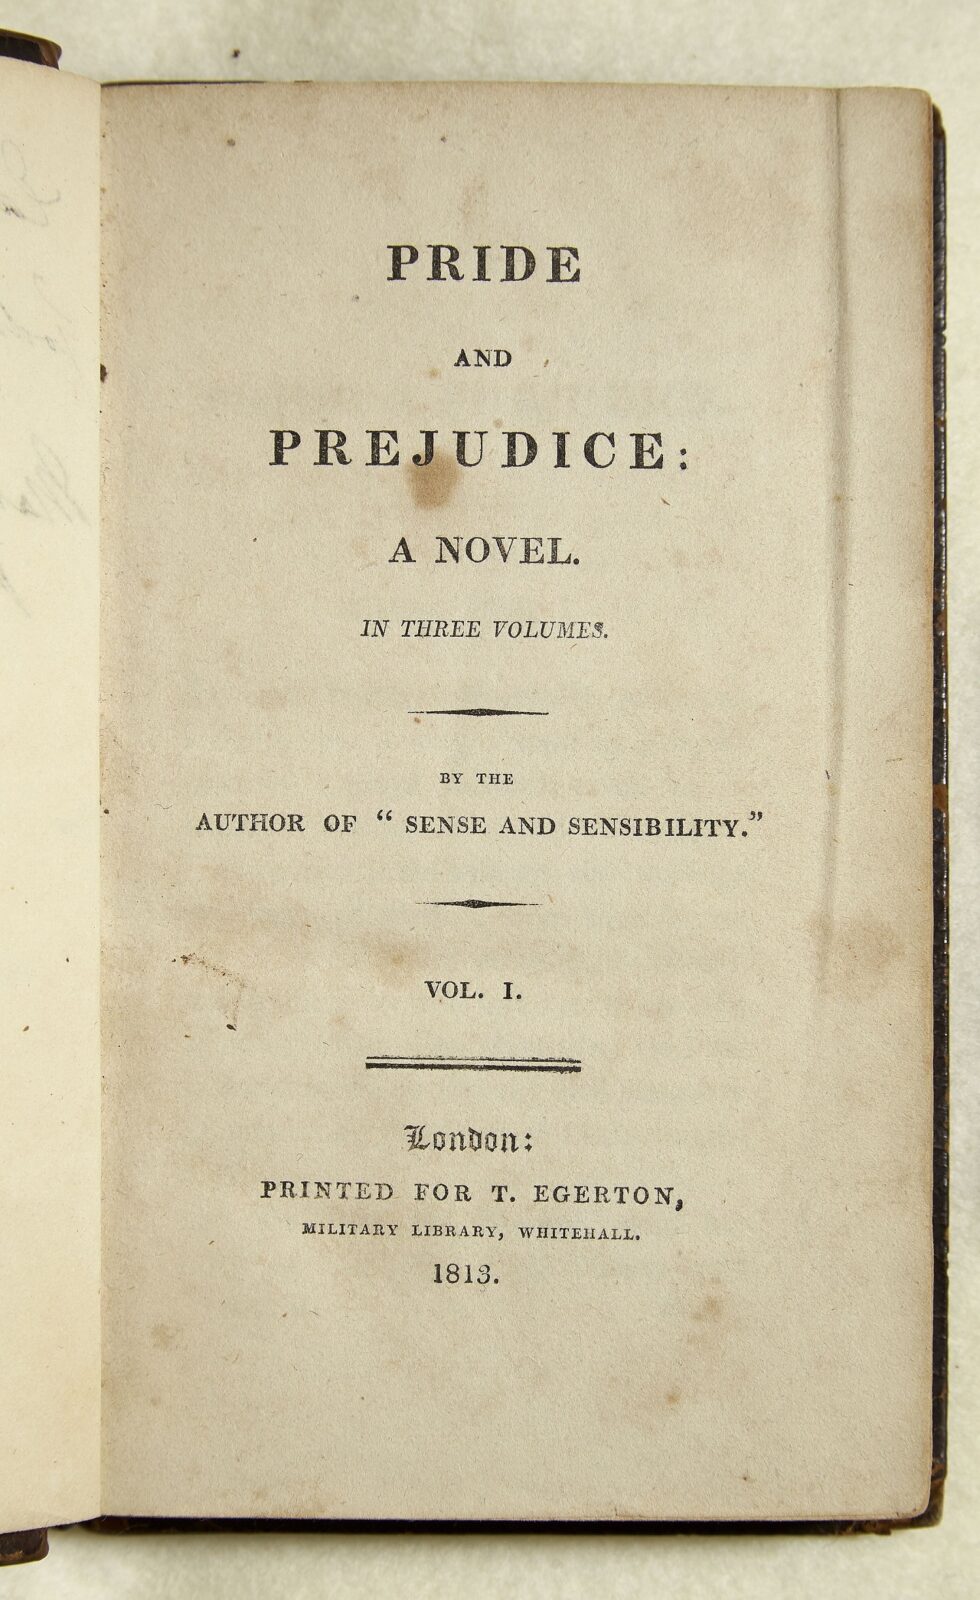 Title page of a First Edition of Pride and Prejudice